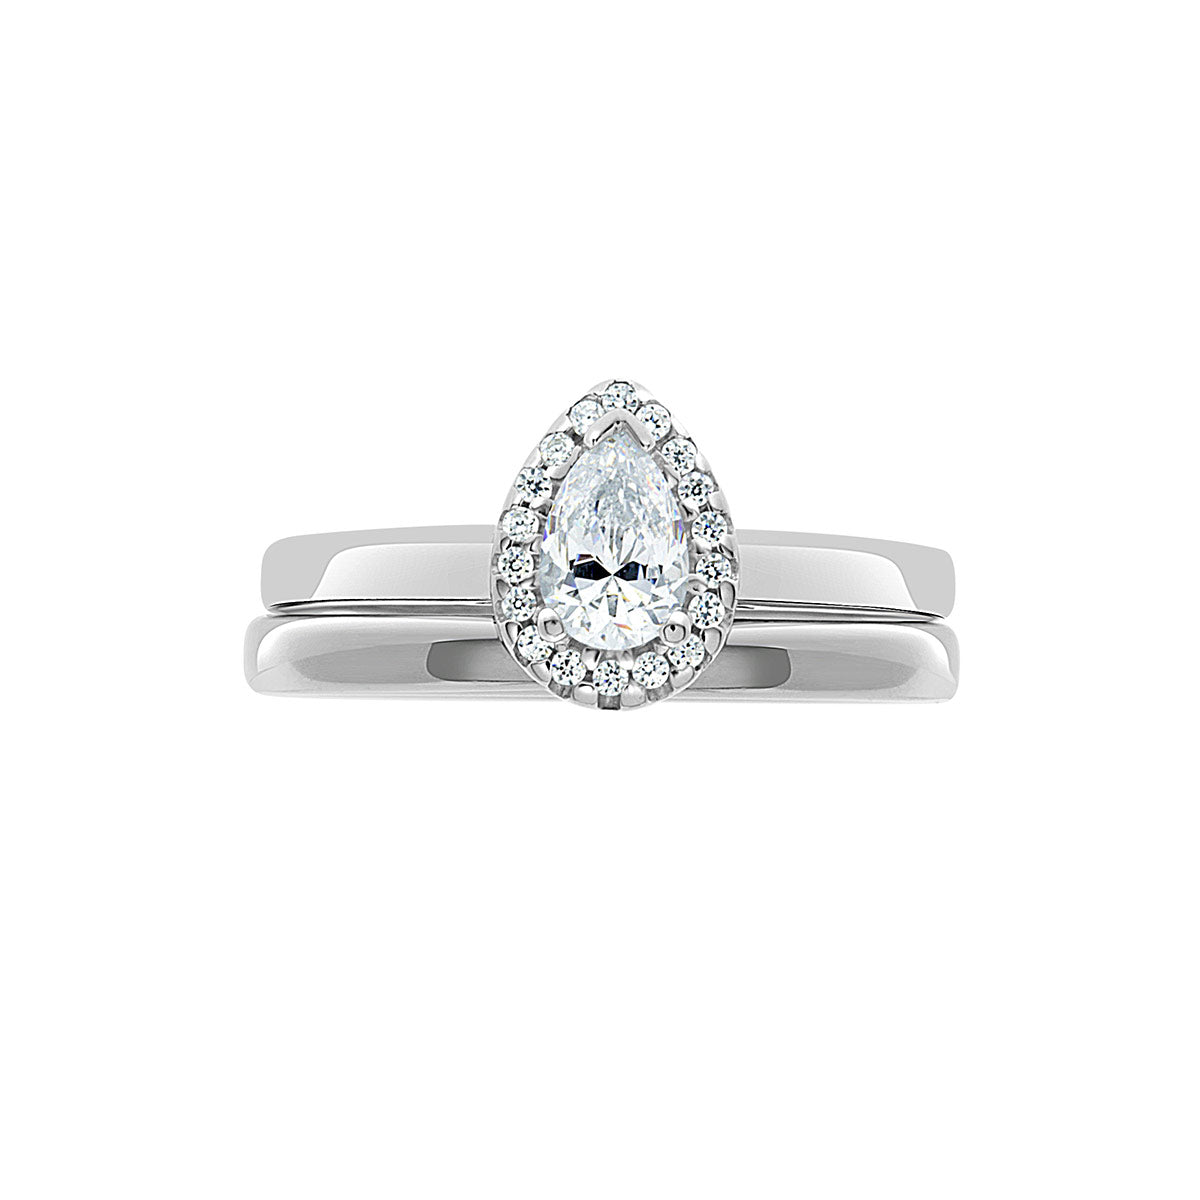 Vintage Engagement Ring with Pear Shape Diamond shown with a matching plain wedding ring, on white background